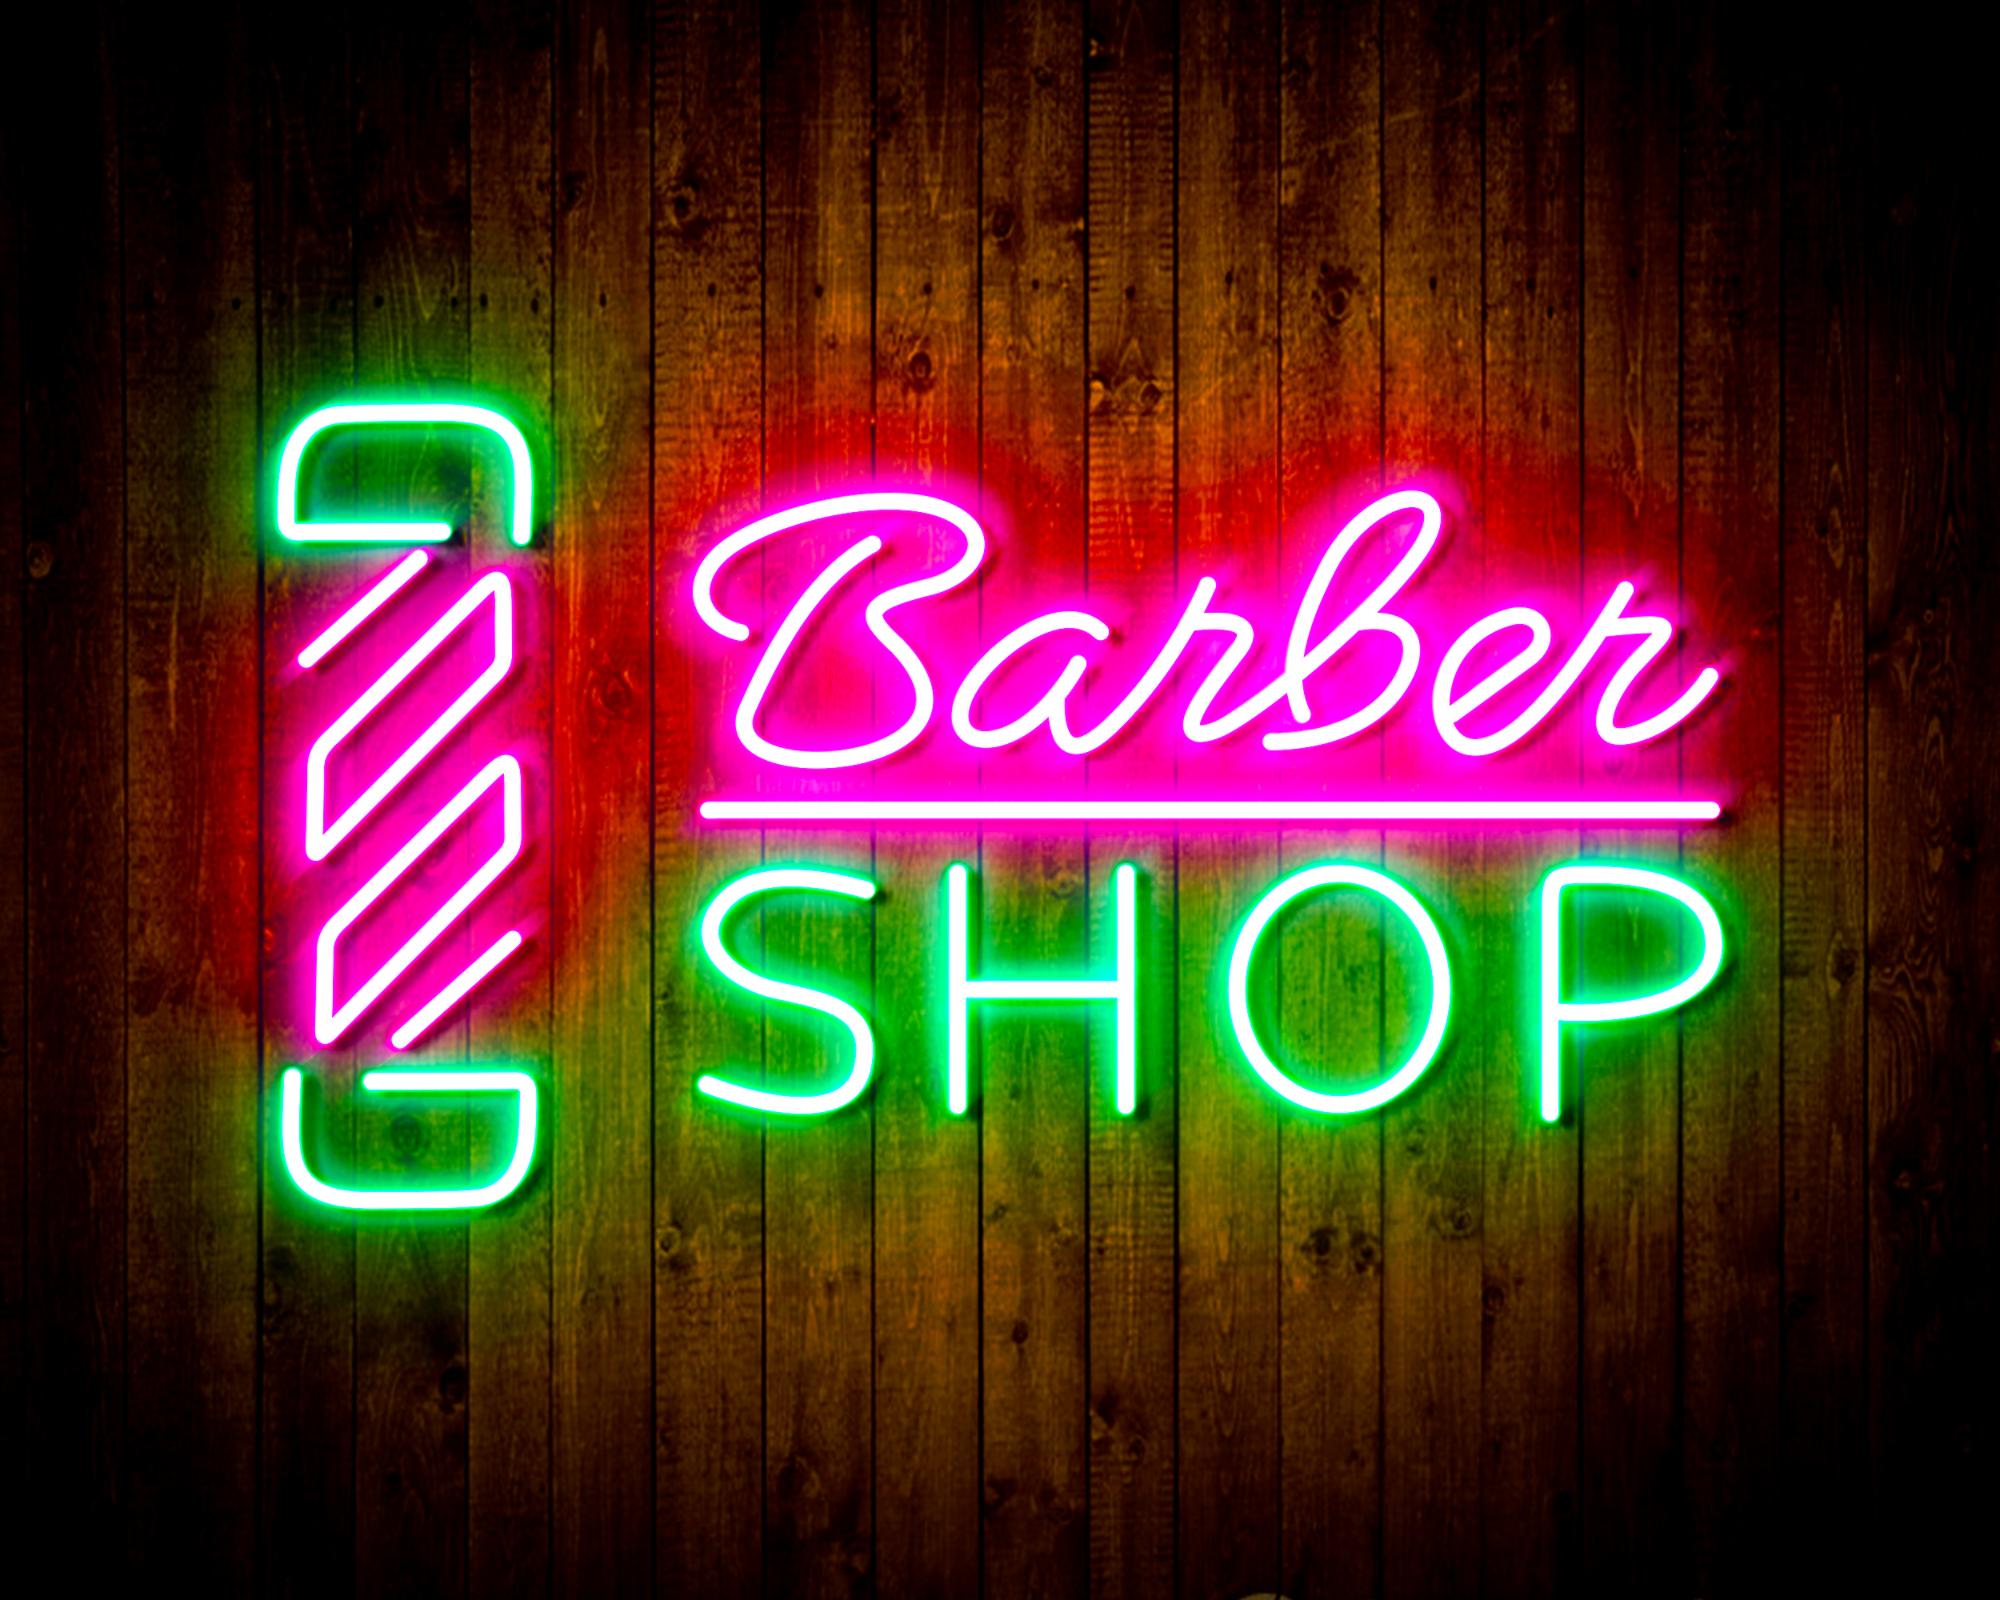 Barber Shop with Barber Pole LED Neon Sign Wall Light